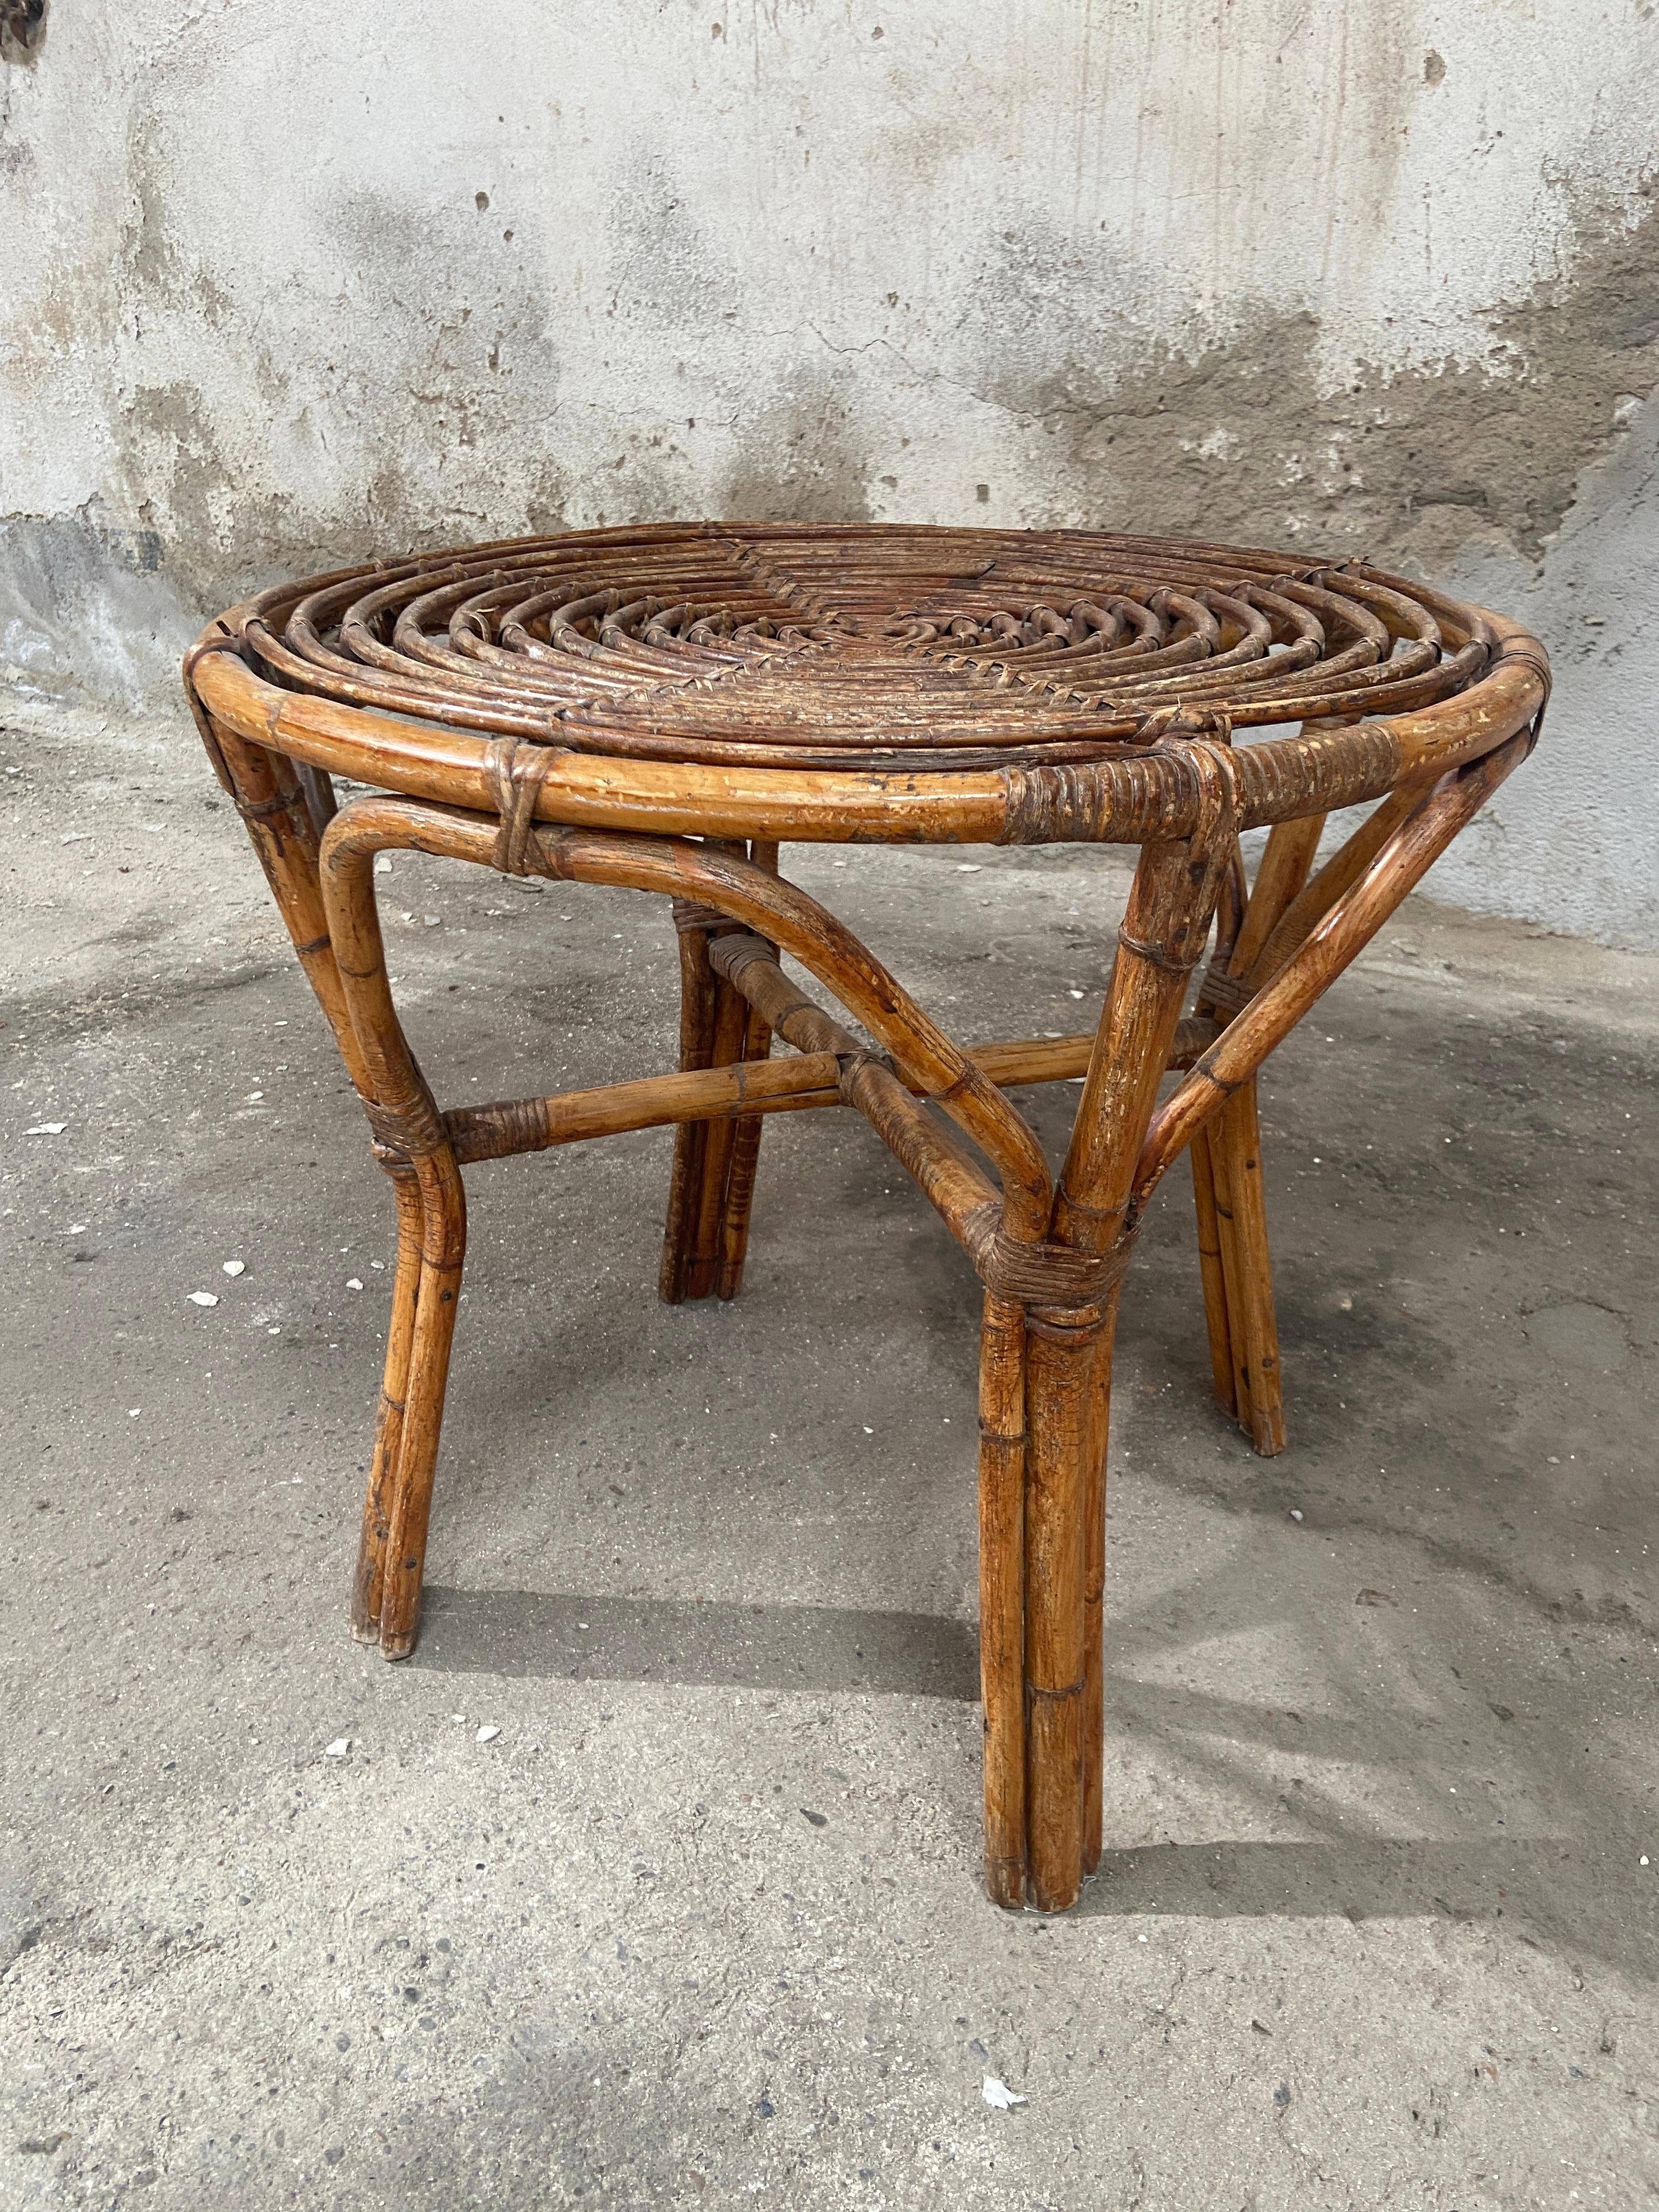 Mid-Century Modern Italian Bamboo and Rattan Round Sofa or Side Table.
The stunning patina of this table is due to age and use